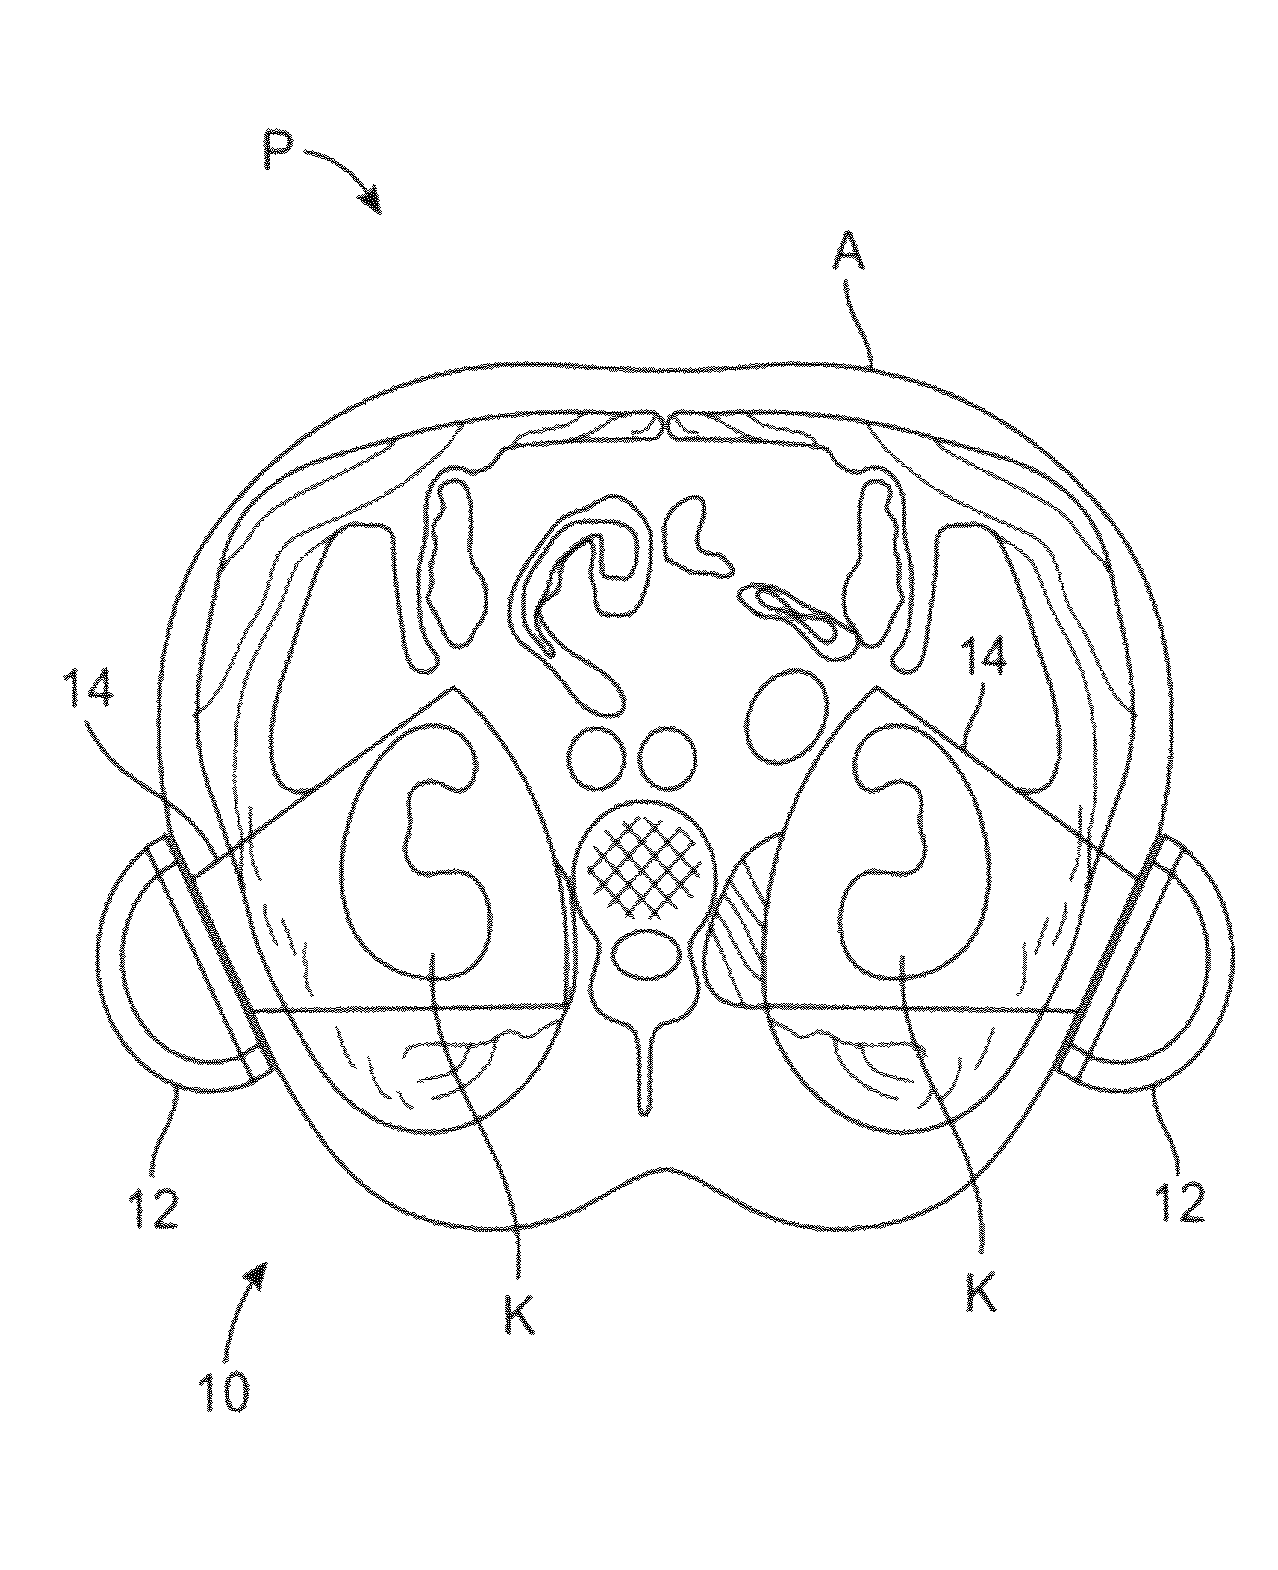 Macro/micro duty cycle devices, systems, and methods employing low-frequency ultrasound or other cyclical pressure energies